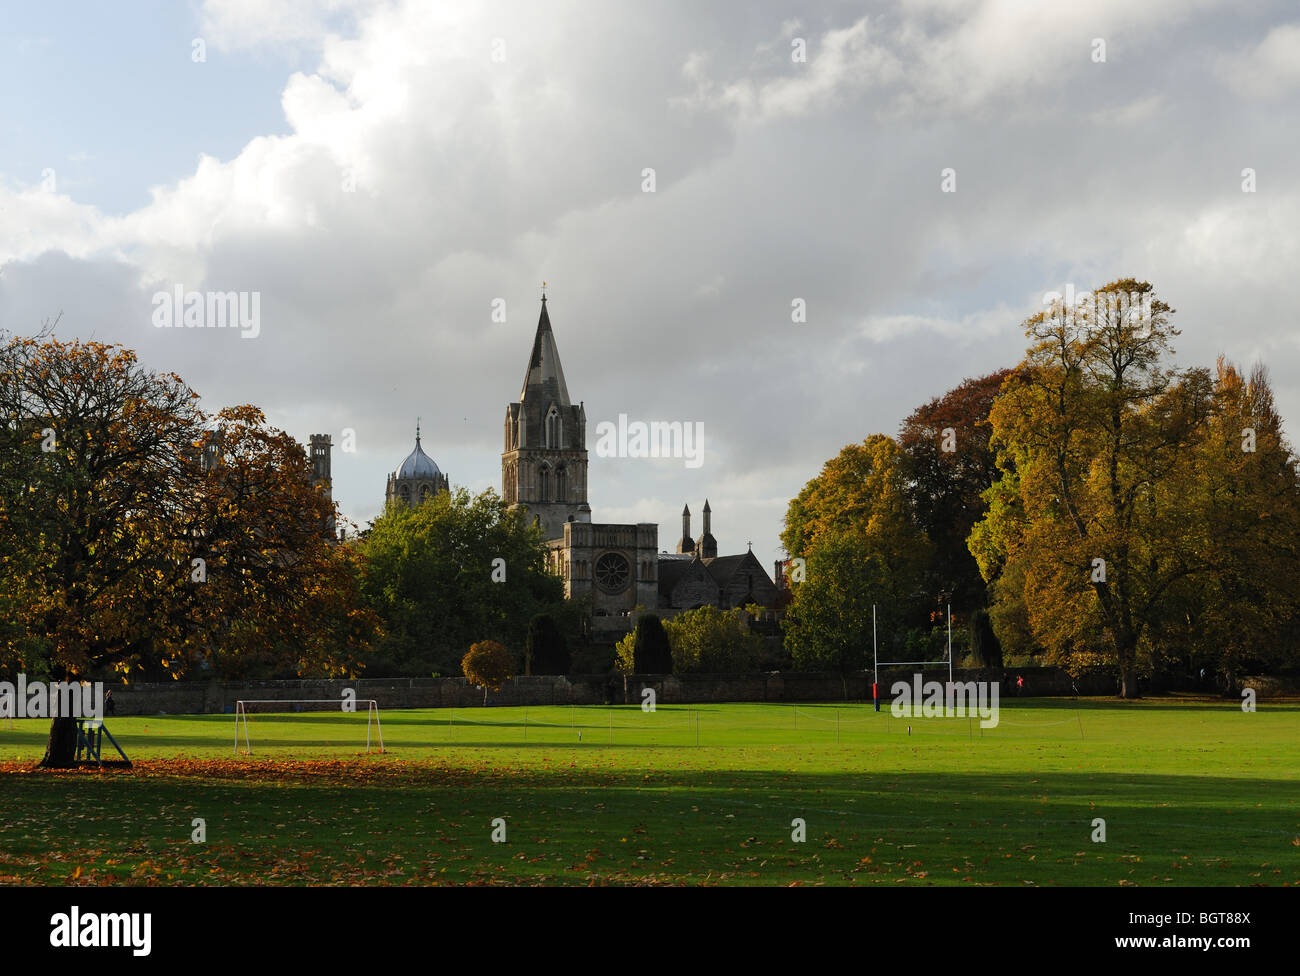 Christ church college cathedral, Oxford - UK Stock Photo